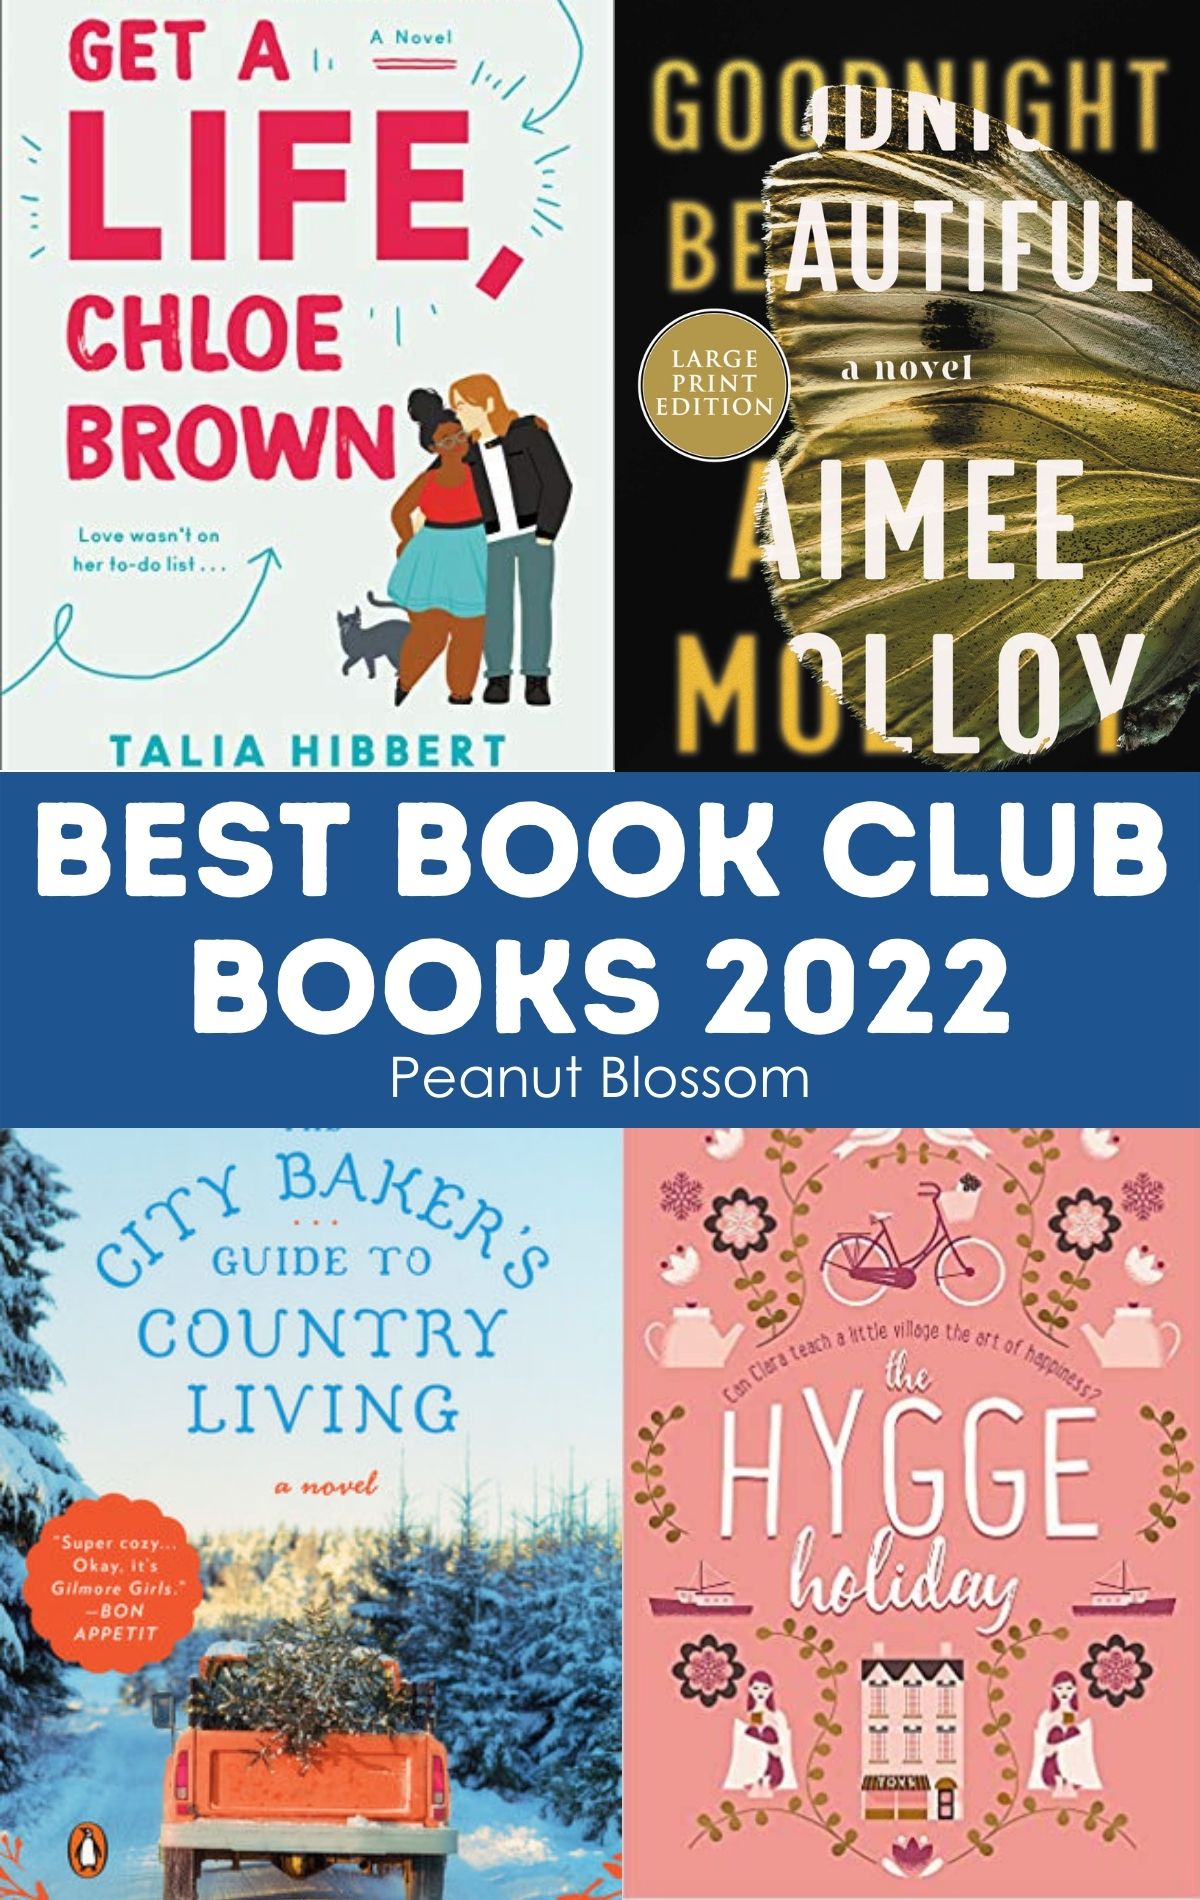 A photo collage shows 4 popular book club books for 2022